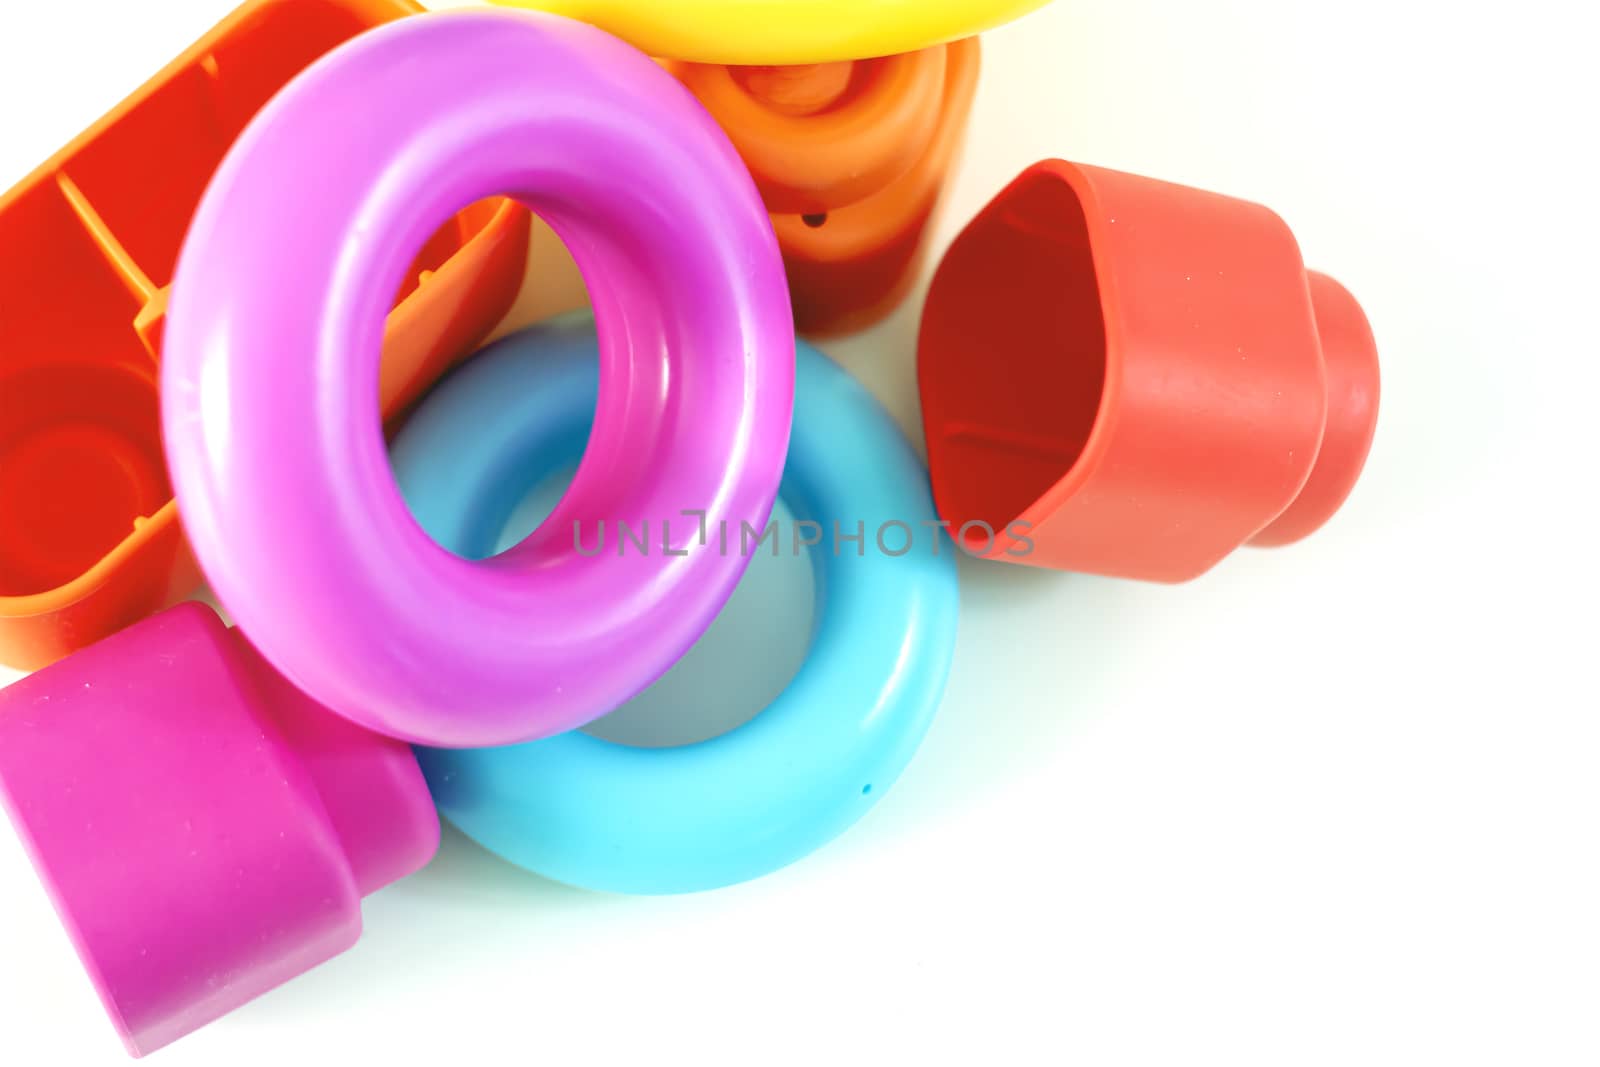 Colored plastic rings and rubber bricks for children to play. by rarrarorro